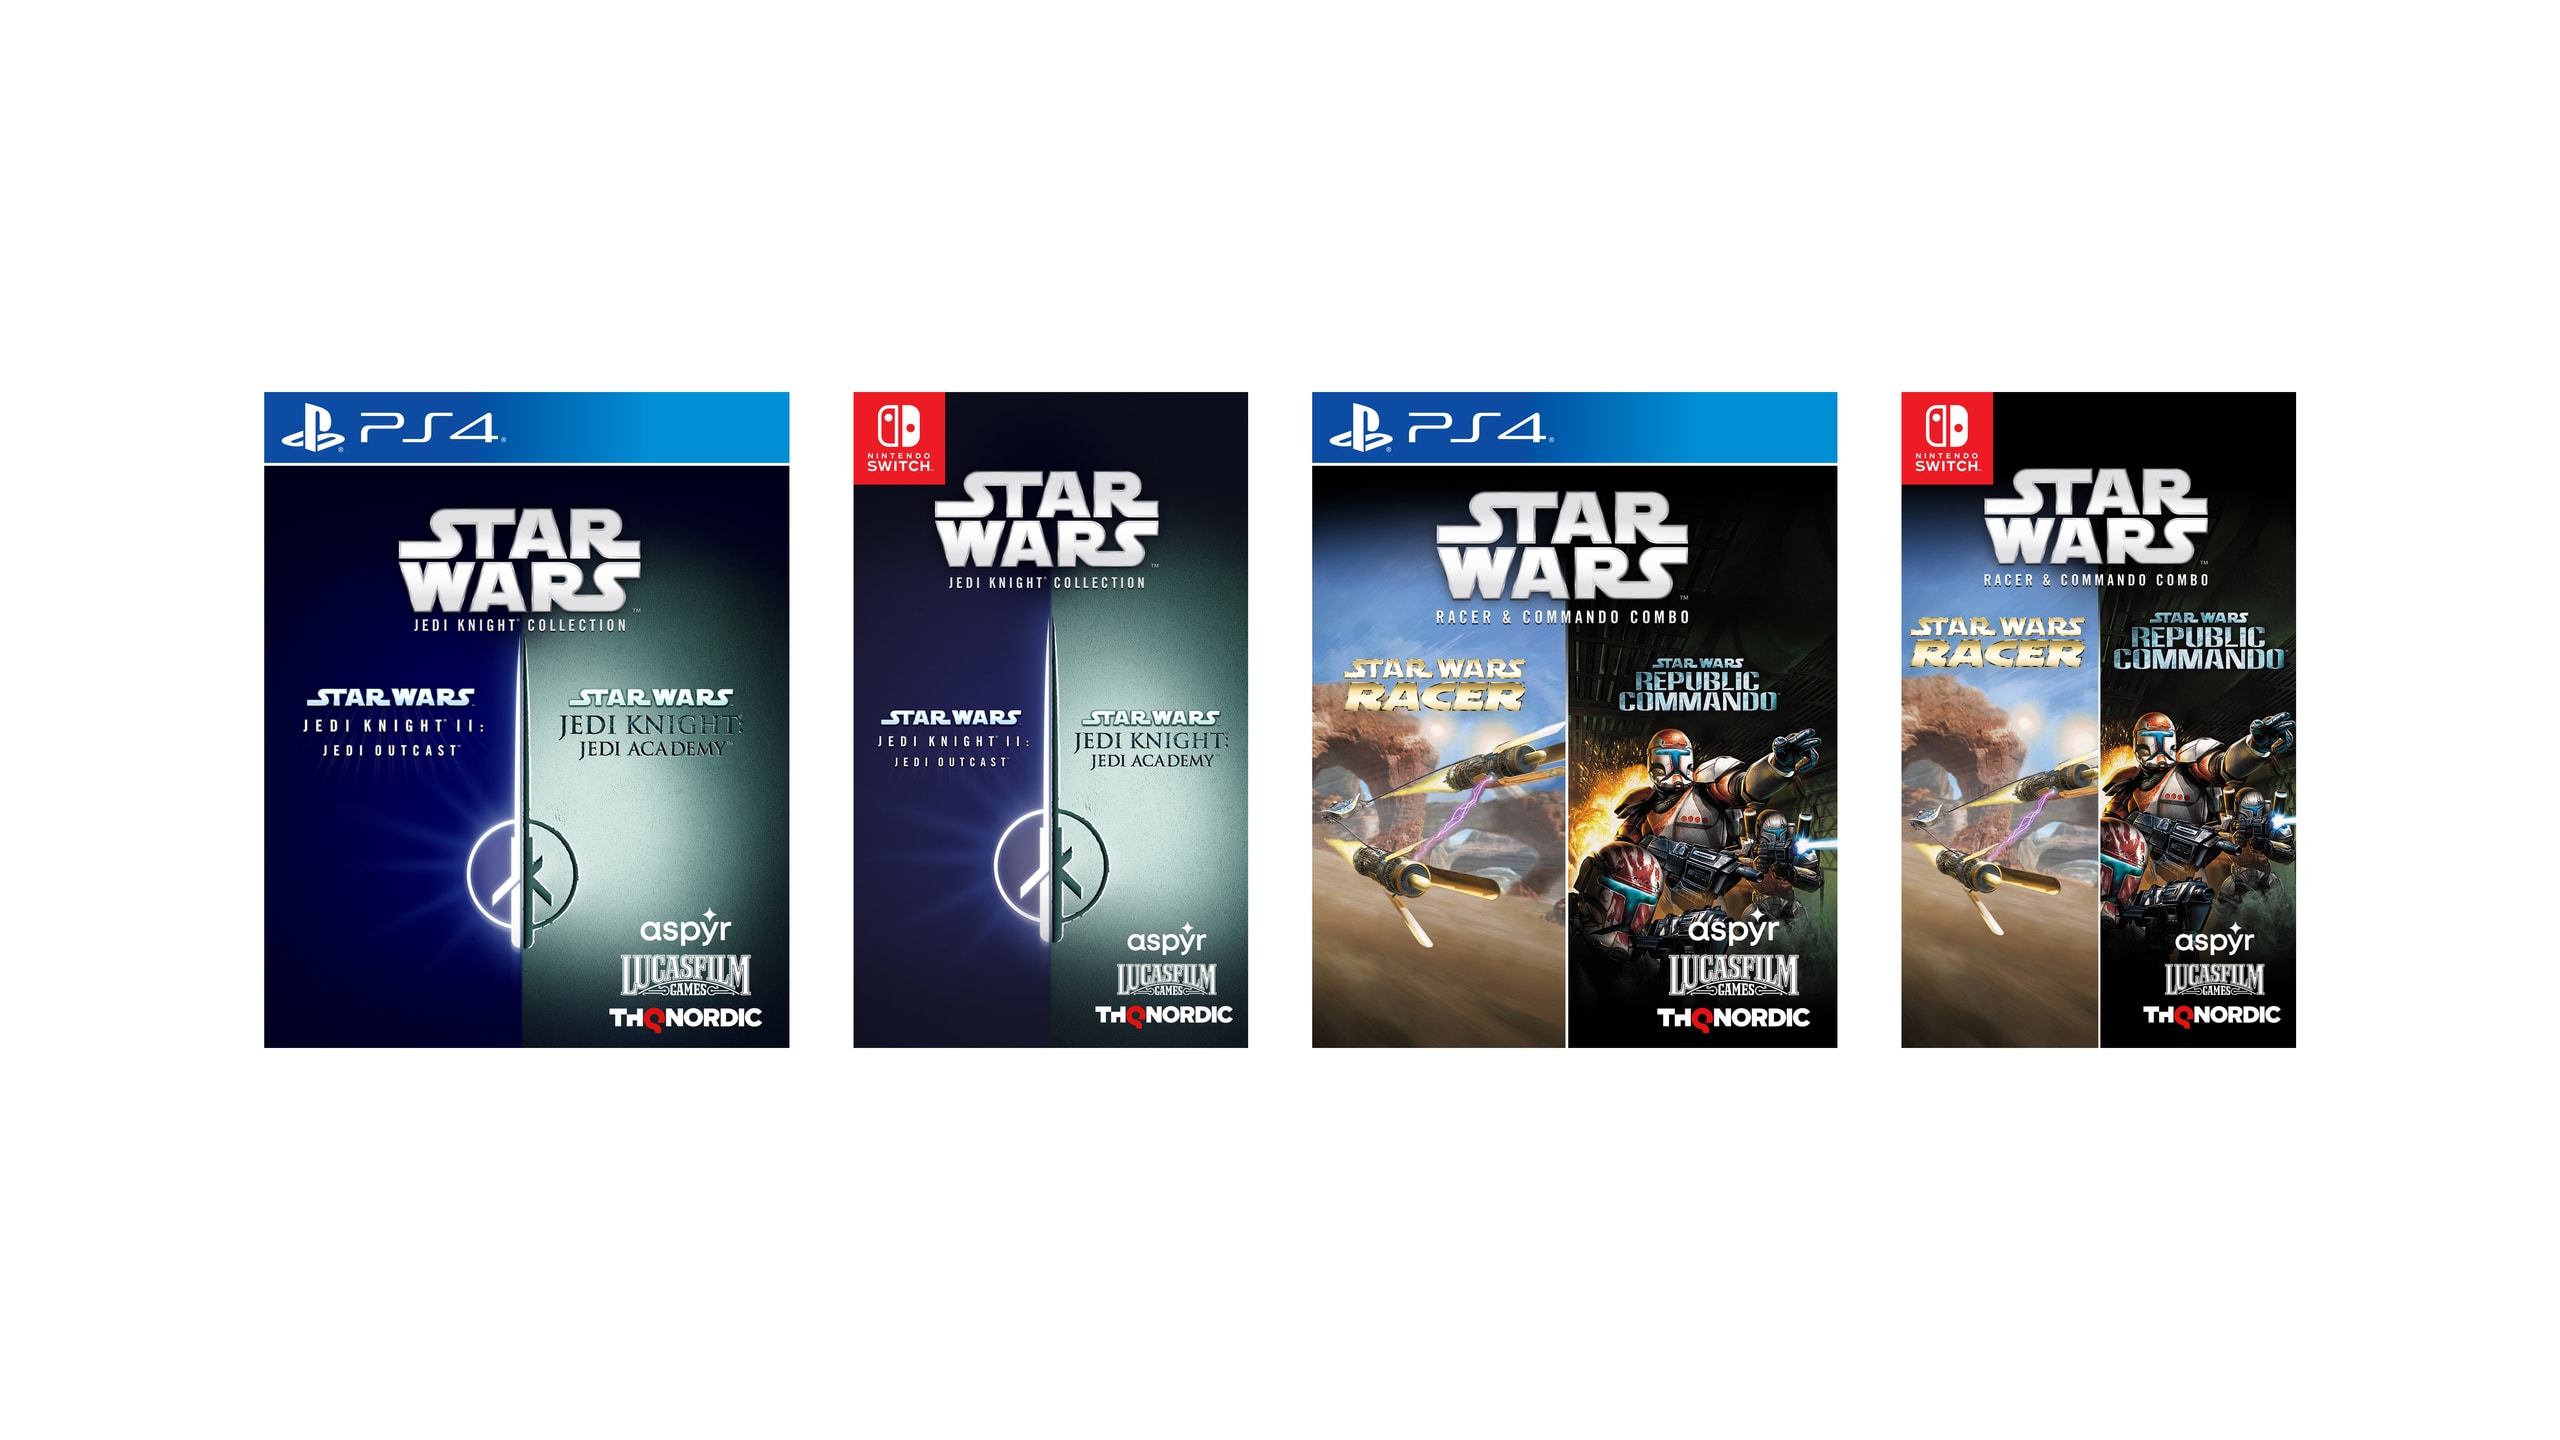 krøllet Ydmyg parti Star Wars Jedi Knight Collection and Star Wars Racer and Commando Combo  launch October 26 for PS4, November 16 for Switch - Gematsu